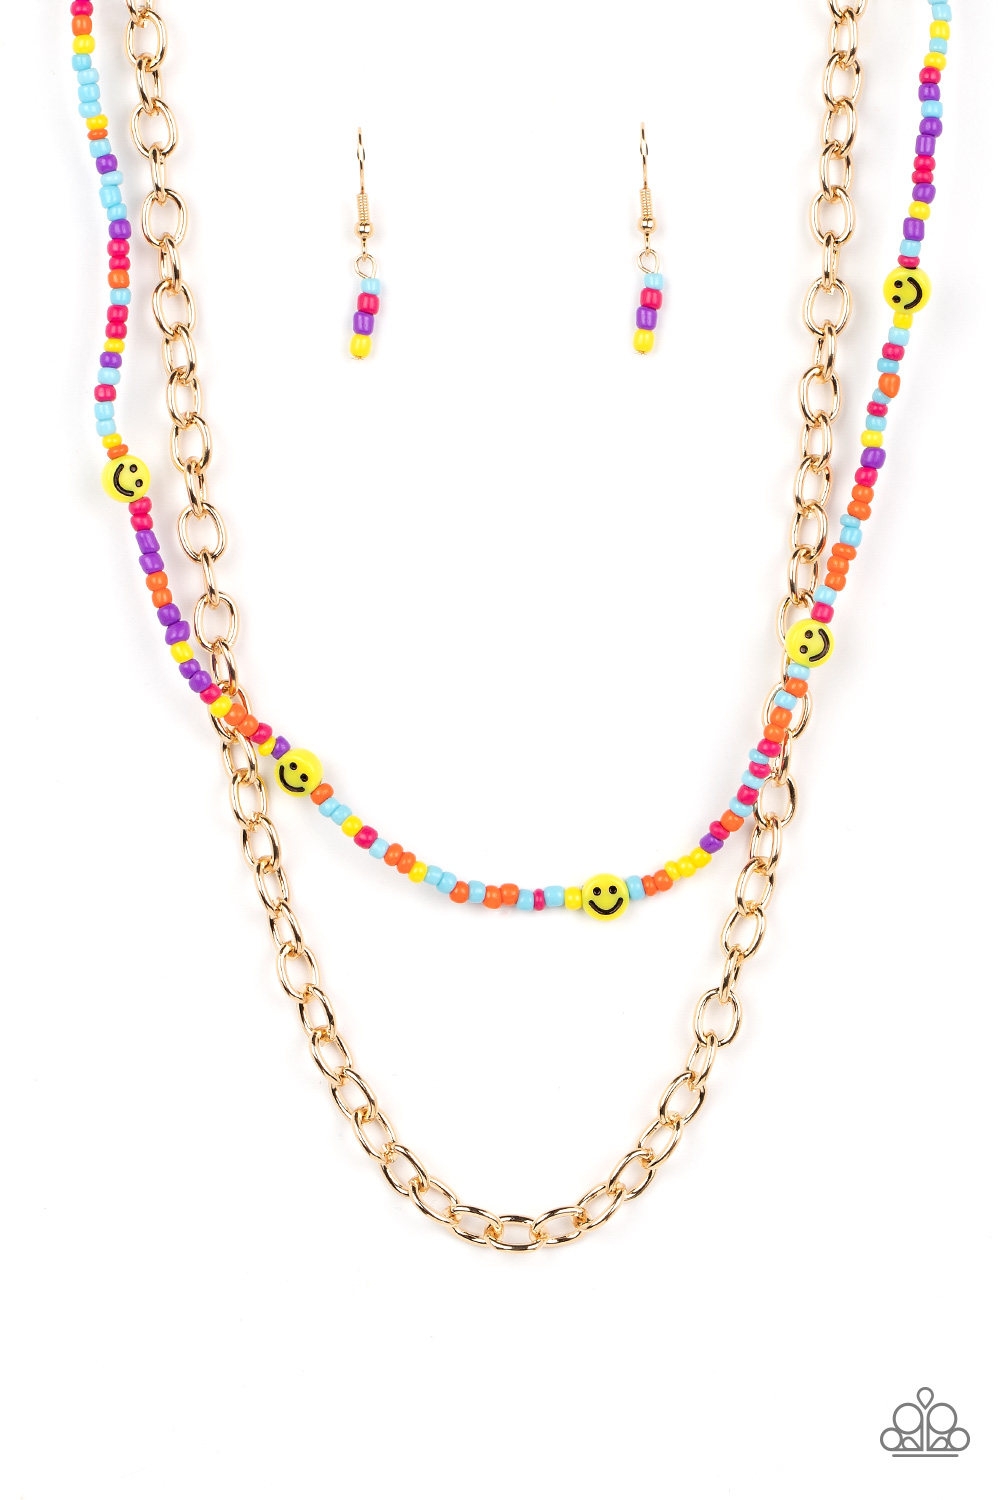 Necklace - Happy Looks Good on You - Multi